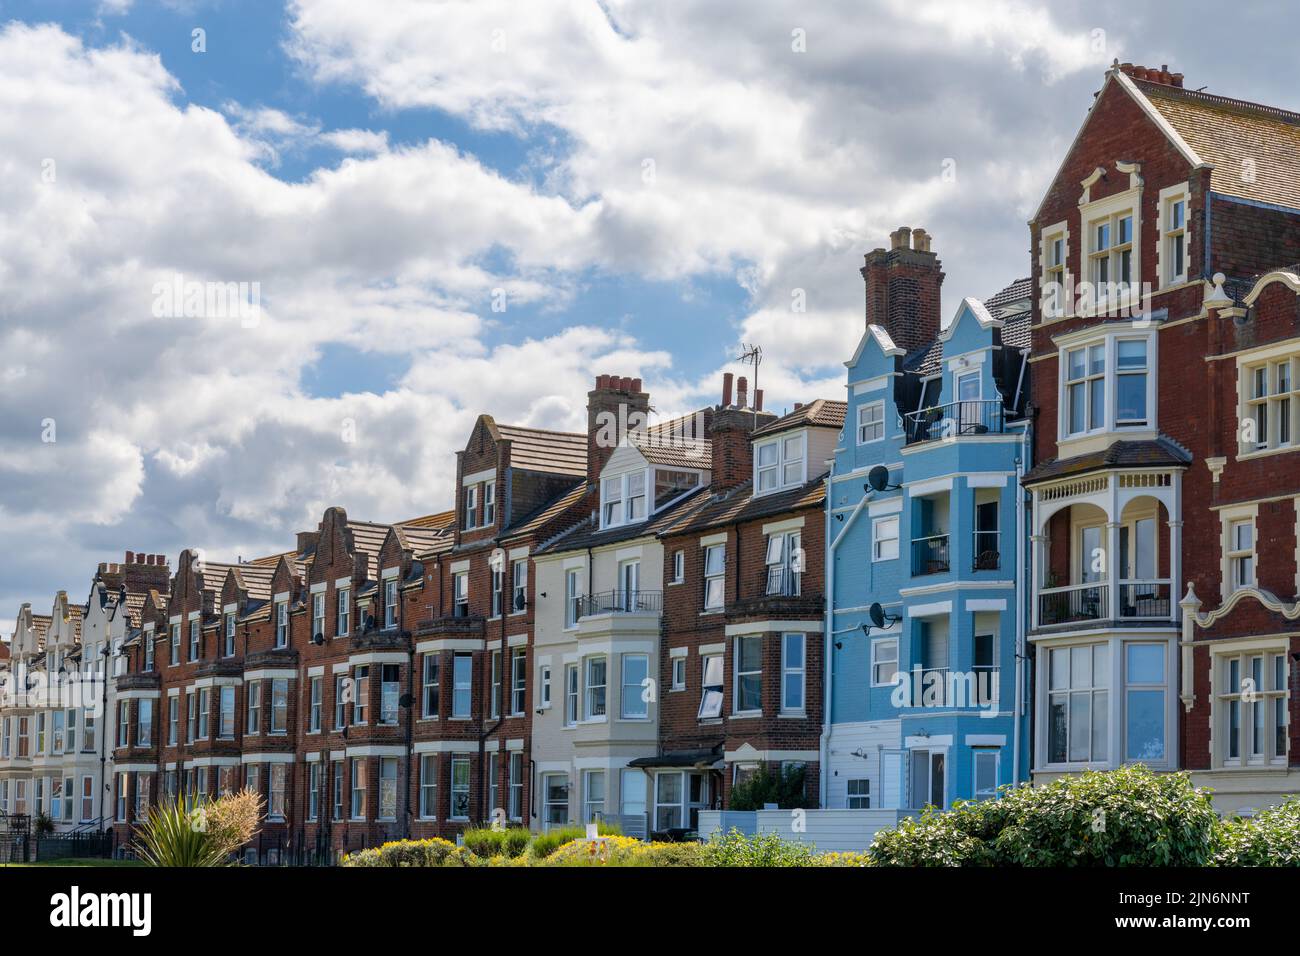 Cromer, United Kingdom - 13 June, 2022: colorful English rowhouses and town houses in the historic city center of Cromer Stock Photo